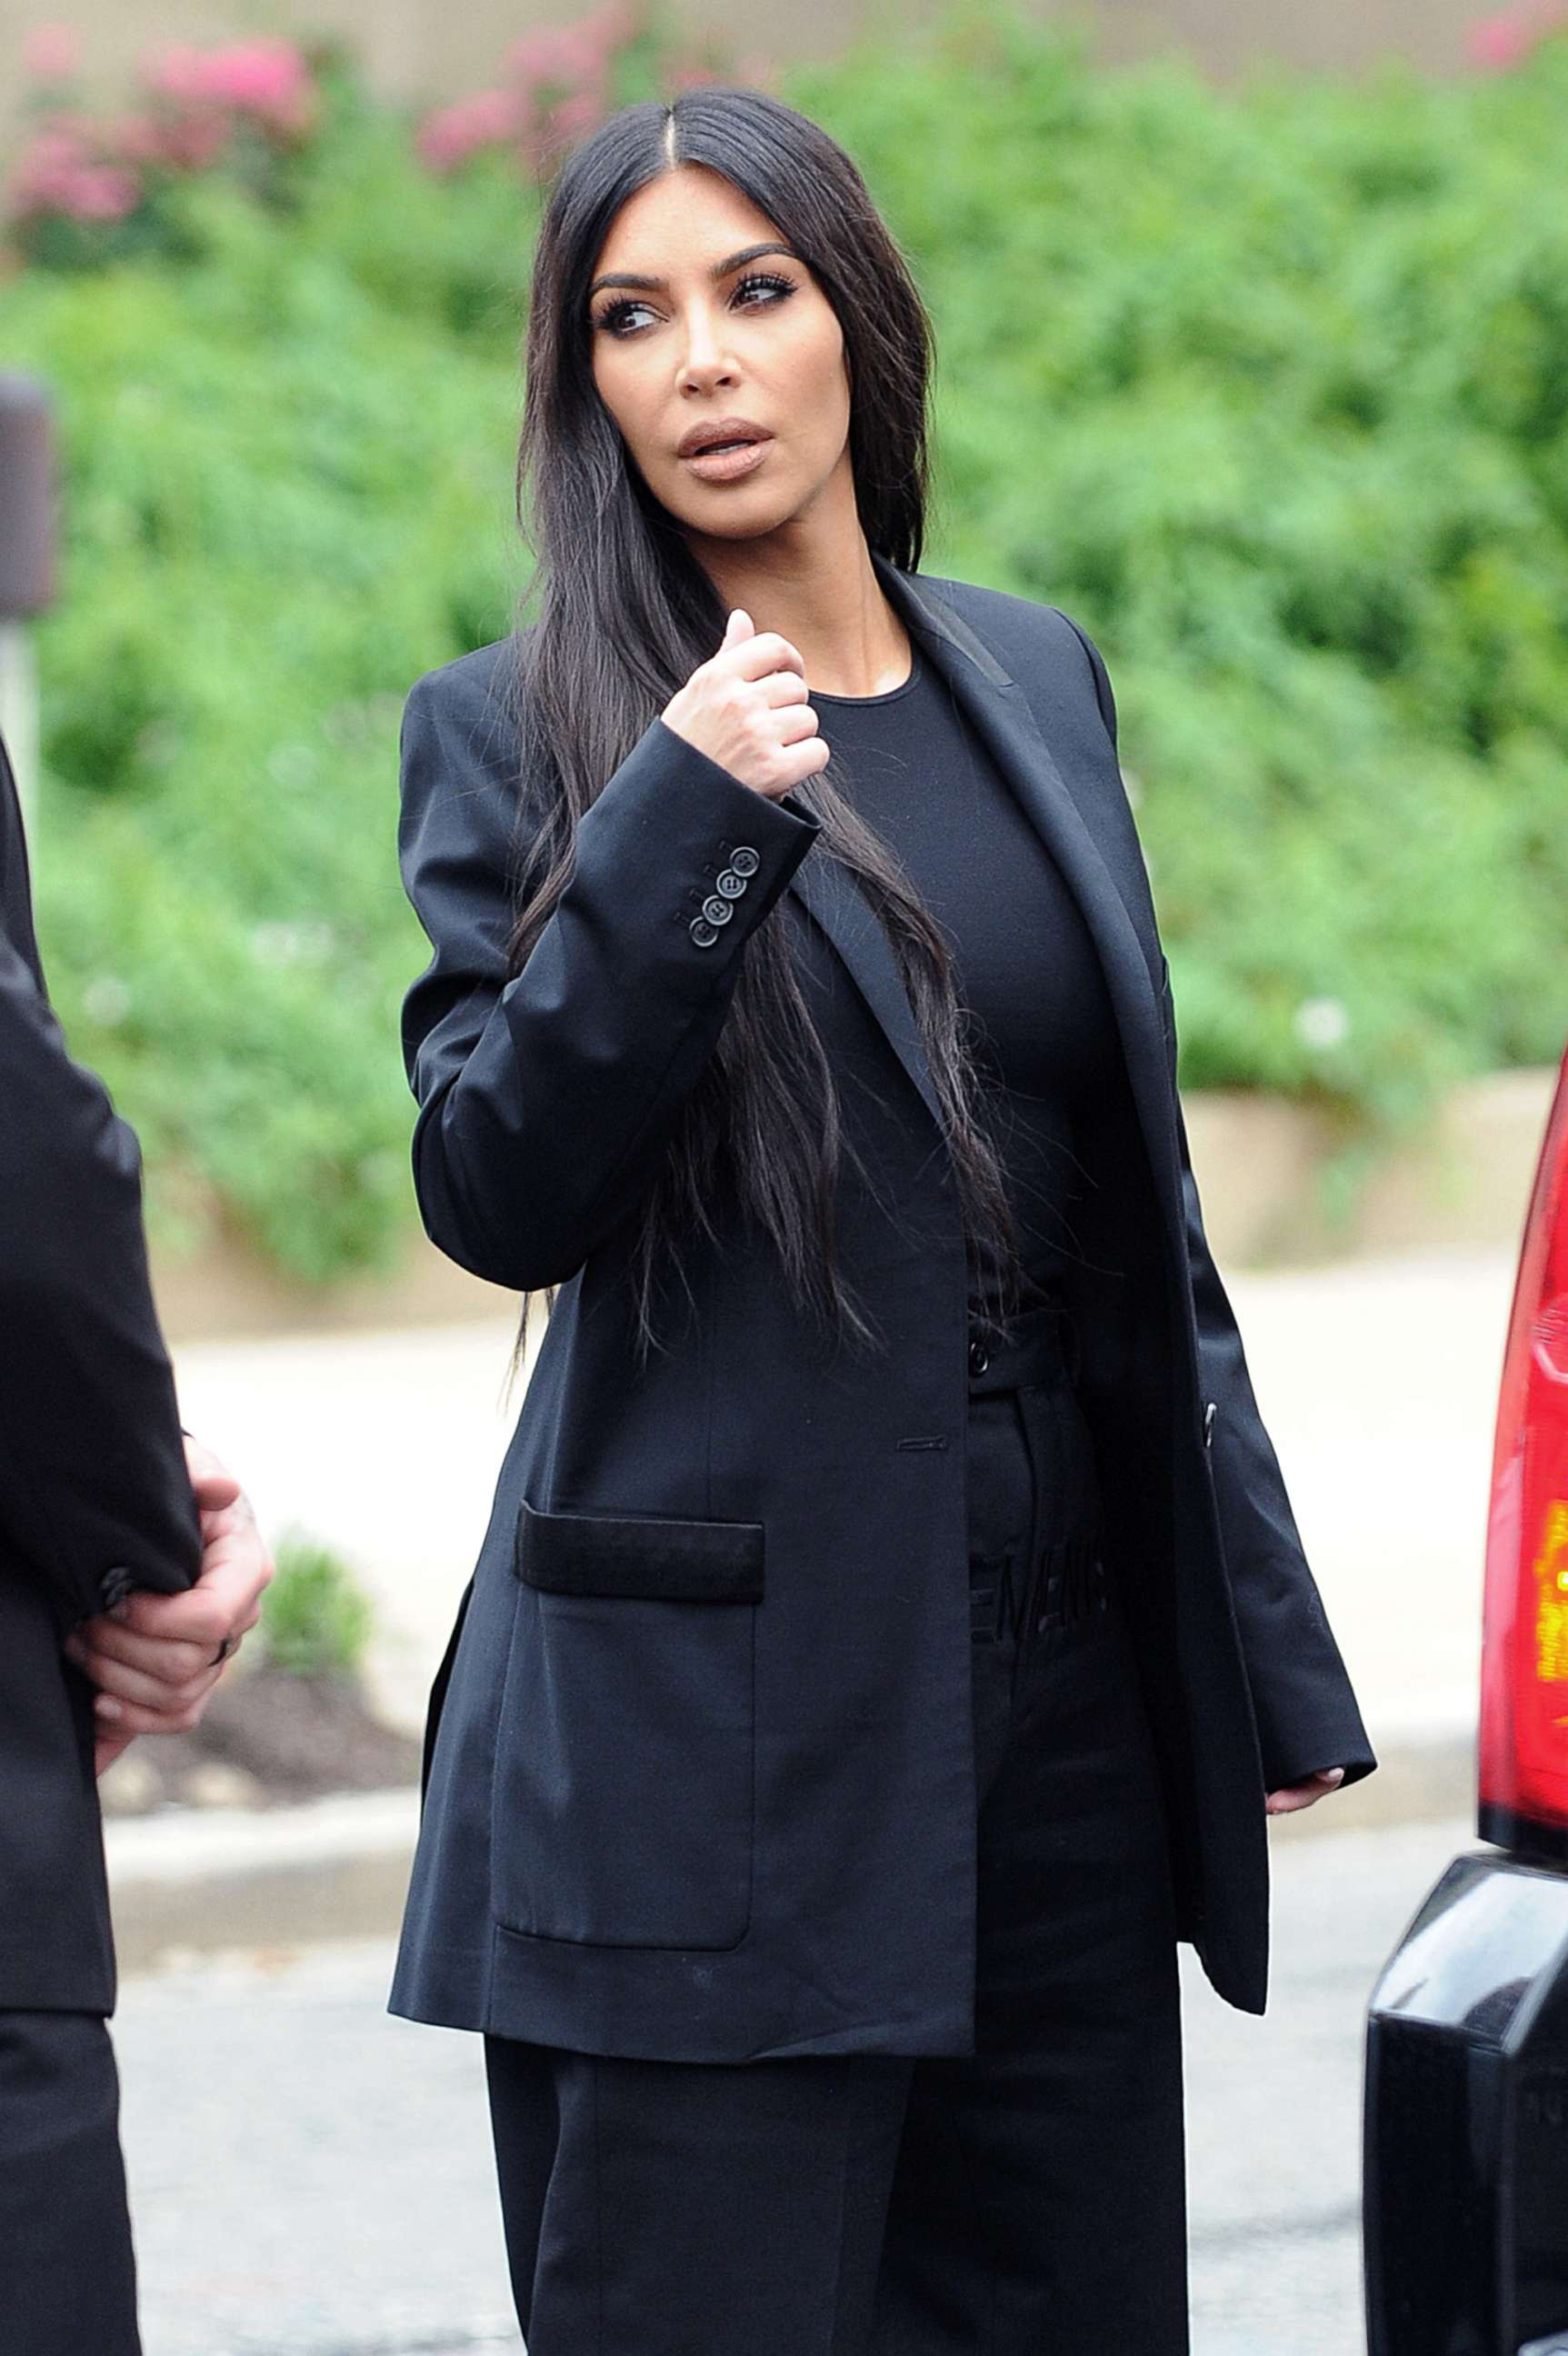 PHOTO: Kim Kardashian arrived at the White House for a meeting with President Trump to discuss prison reform and Alice Marie Johnson.